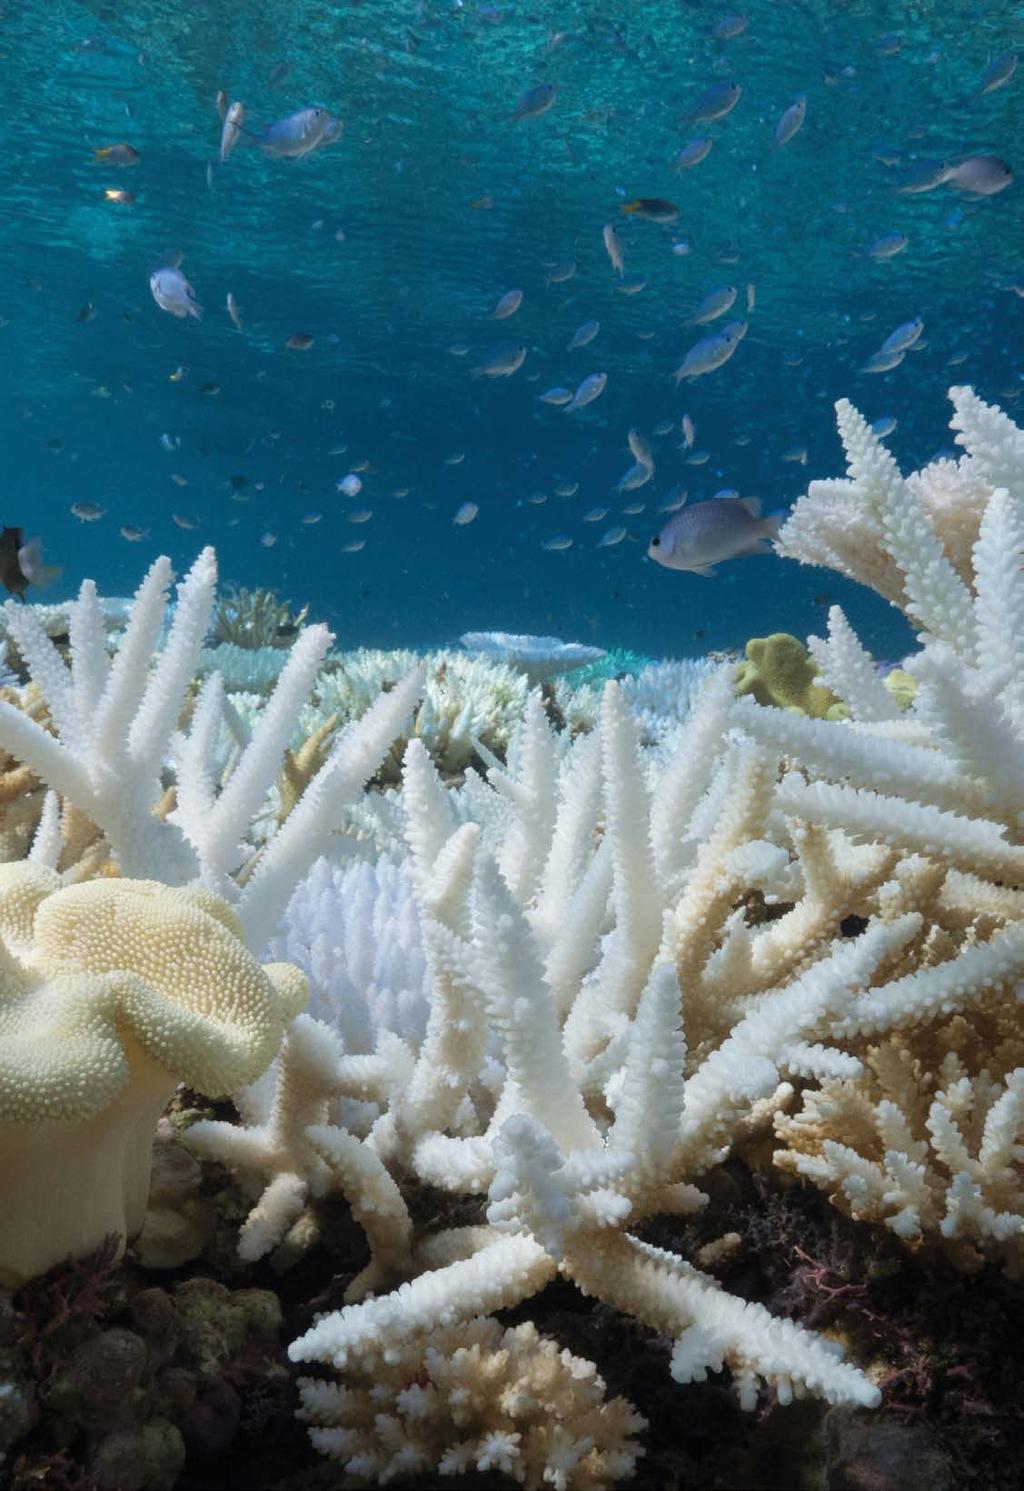 THE GREAT BARRIER REEF Coral reefs have been called the rainforests of the ocean because they are so rich in biodiversity. They are home to a quarter of all marine life.